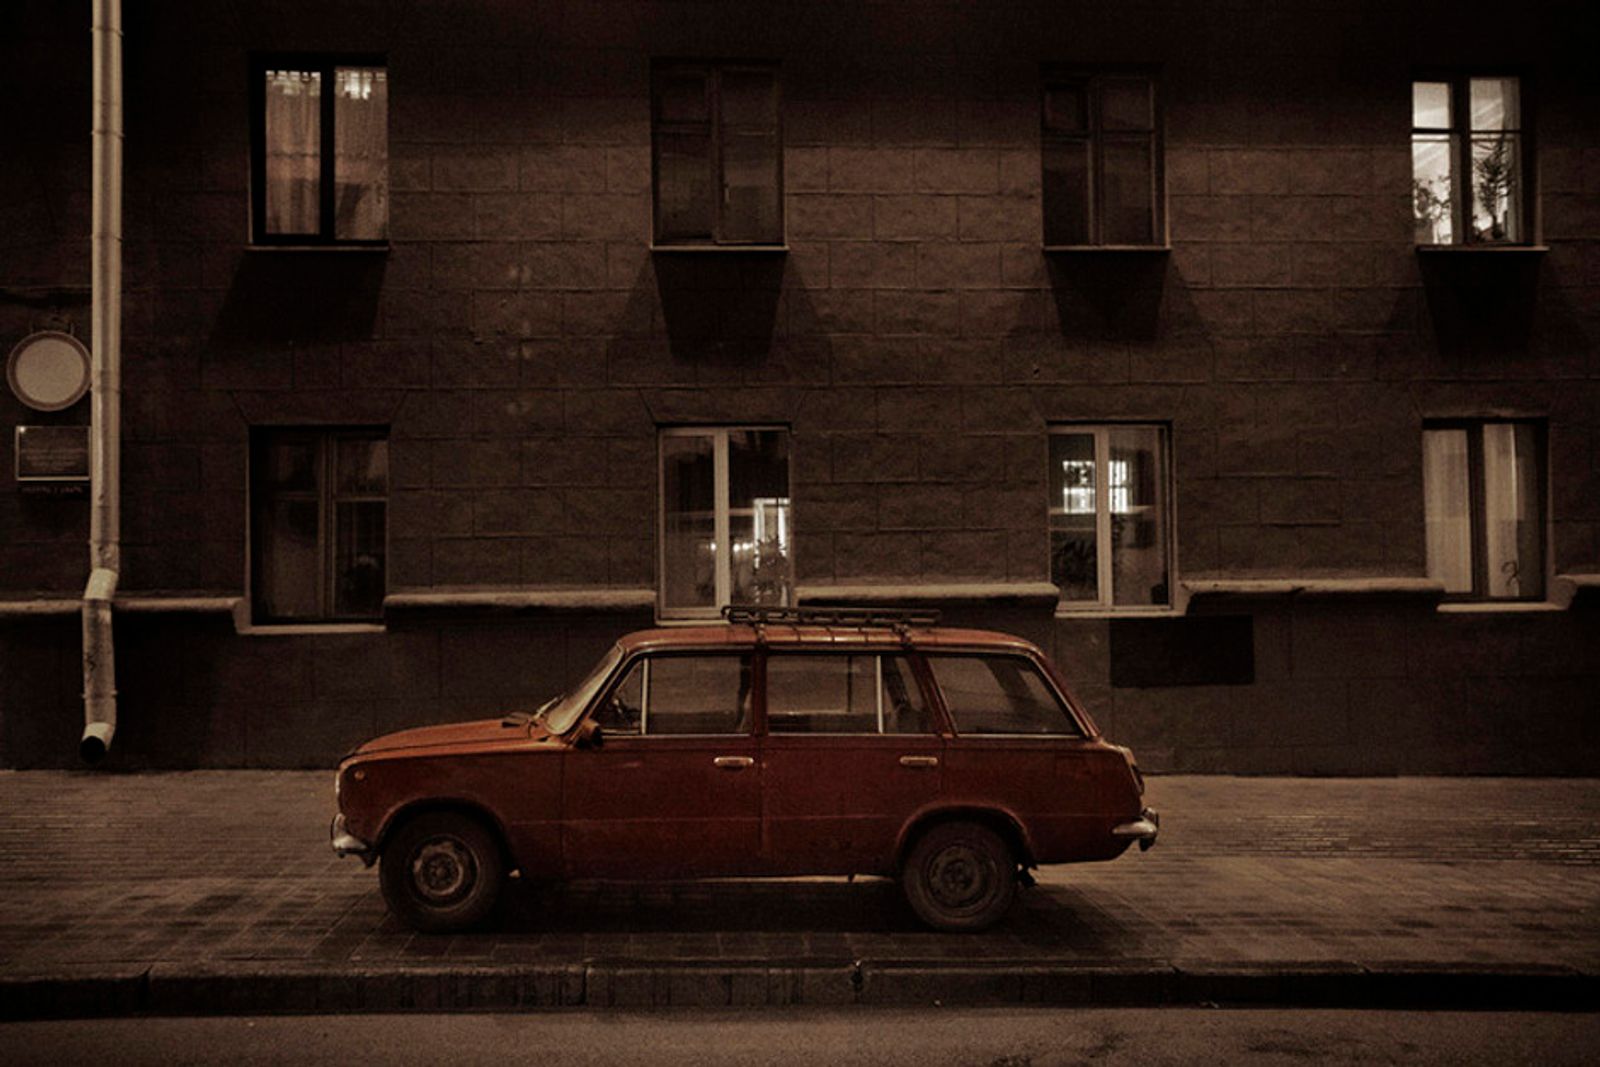 © Alessandro Vincenzi - An old car parked in Minsk city center.